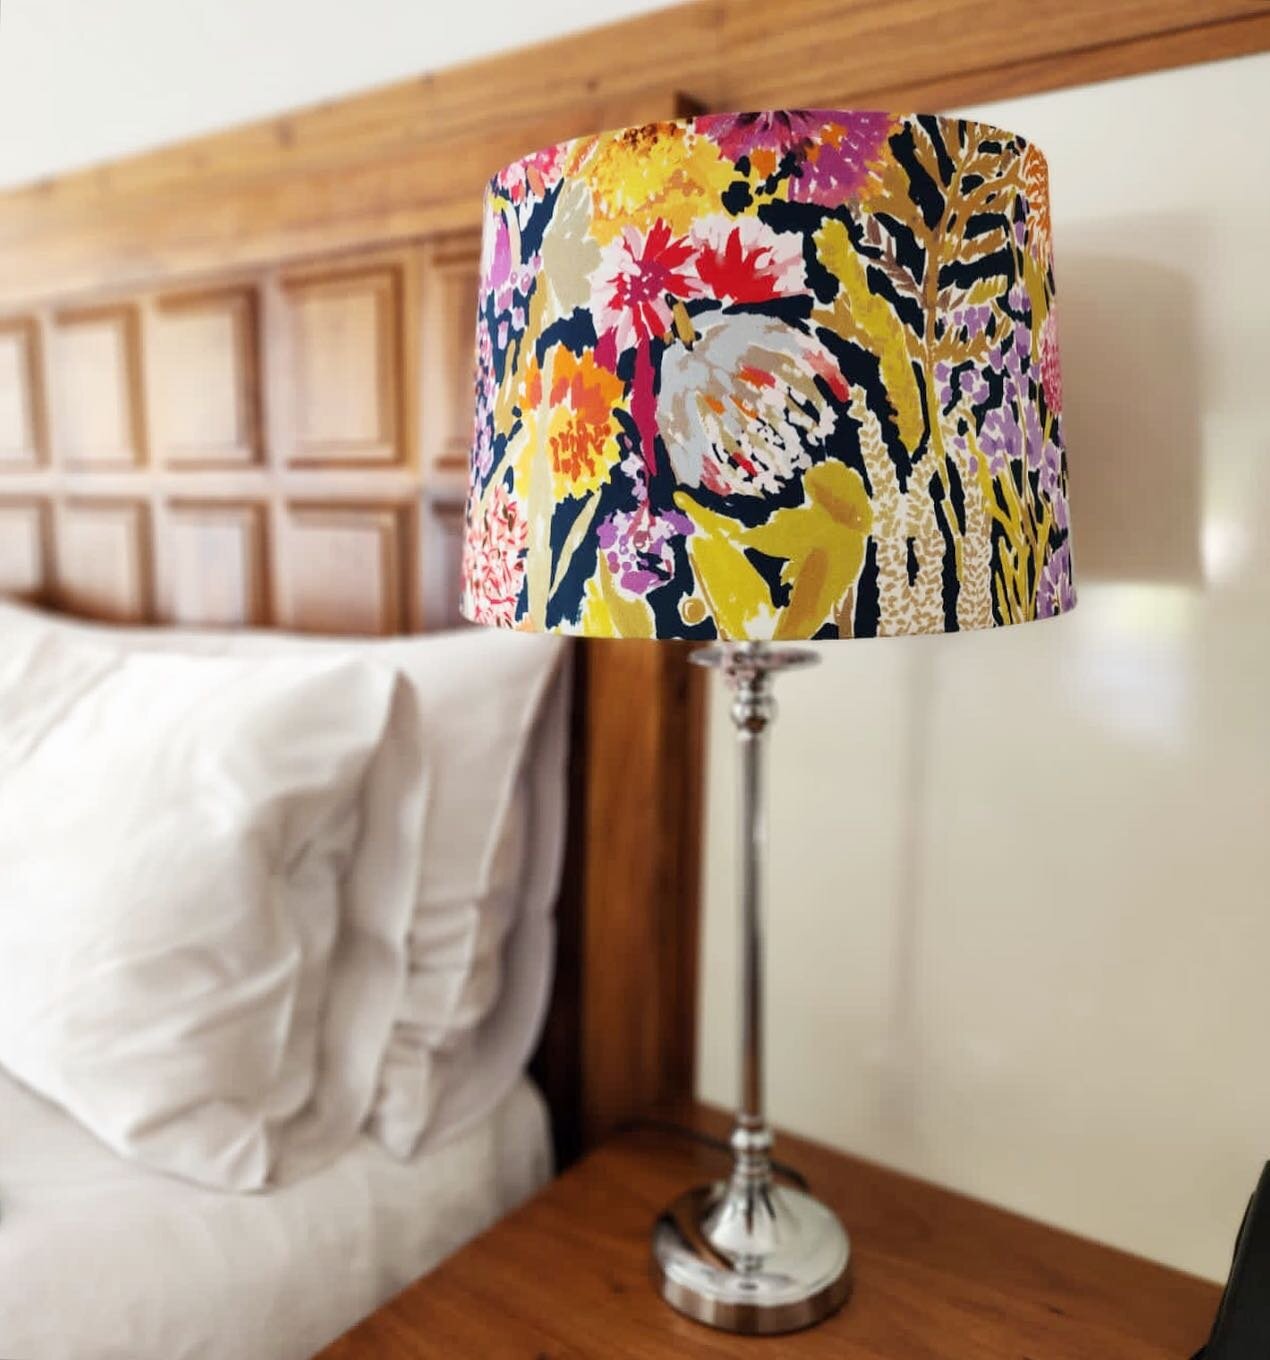 At Inca Interiors, we believe that every detail matters when it comes to interior decorating, and that includes lampshades.

Recovering lampshades is a transformative process that can breathe new life into a tired or outdated piece.

#incainteriors #